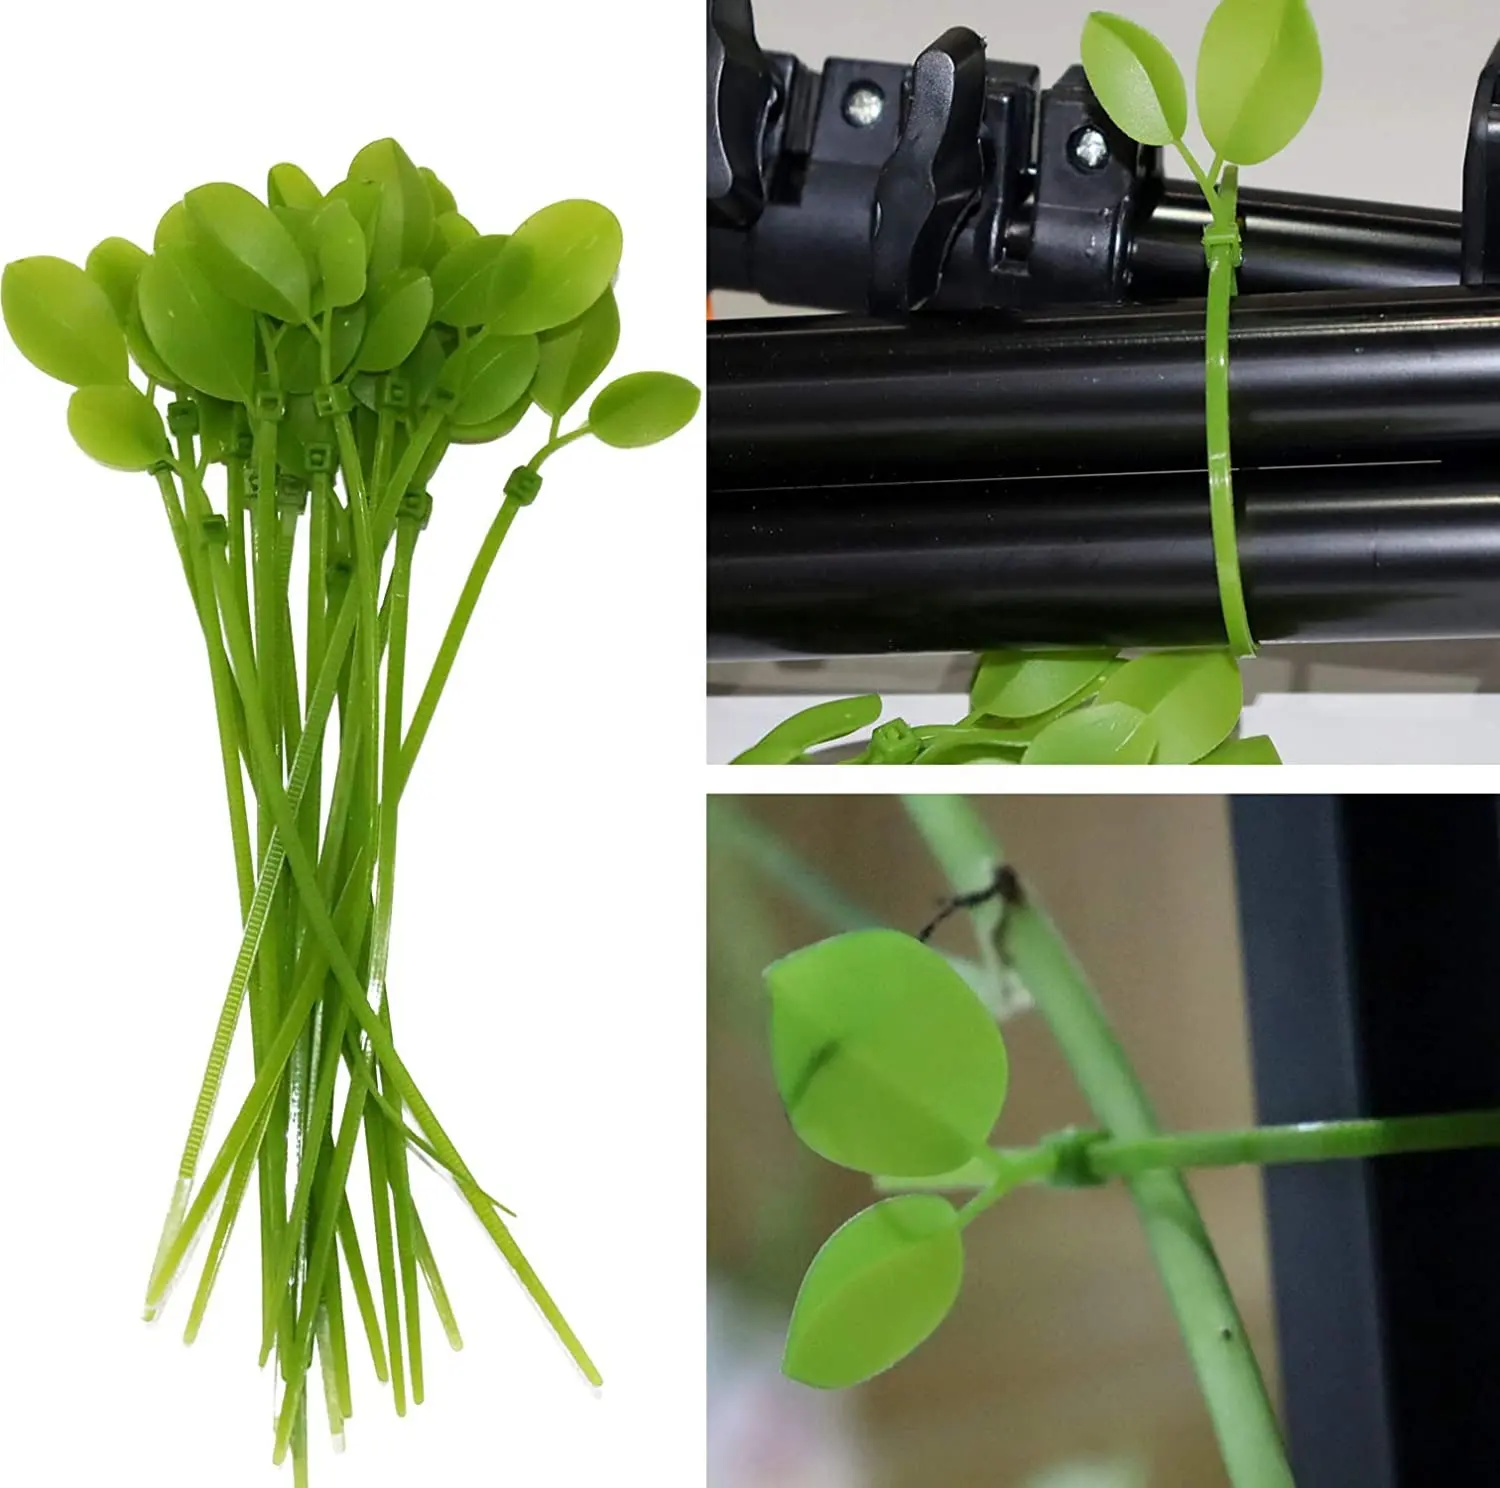 6" Plant Ties Soft Twist Ties Green GardenTies Supply for Supporting Plants Tomatoes